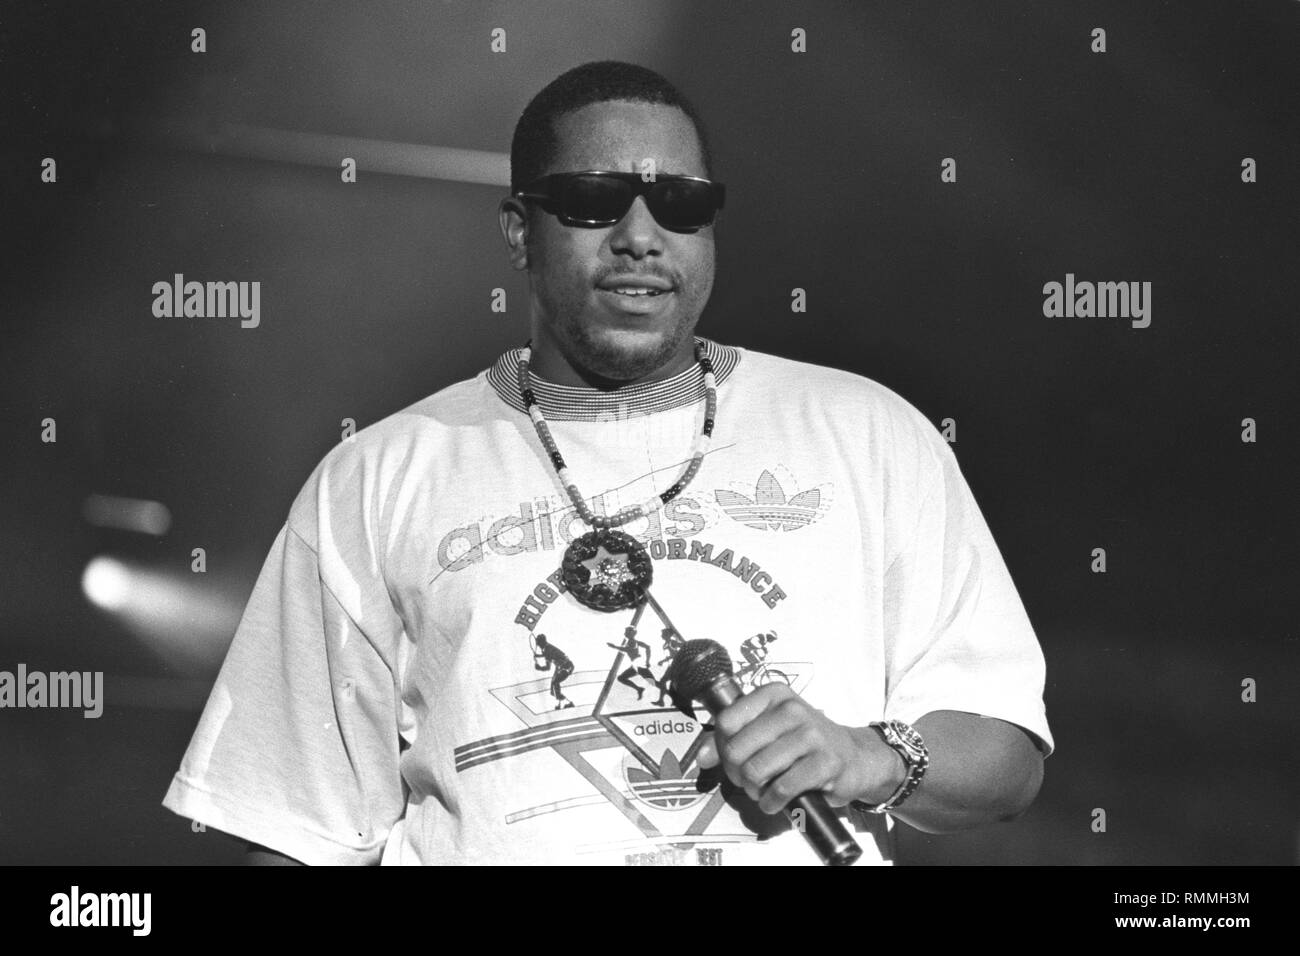 Grammy nominated rapper and actor Anthony Terrell Smith, stage name Tone Lōc is shown performing on stage during a 'live' concert appearance. Stock Photo